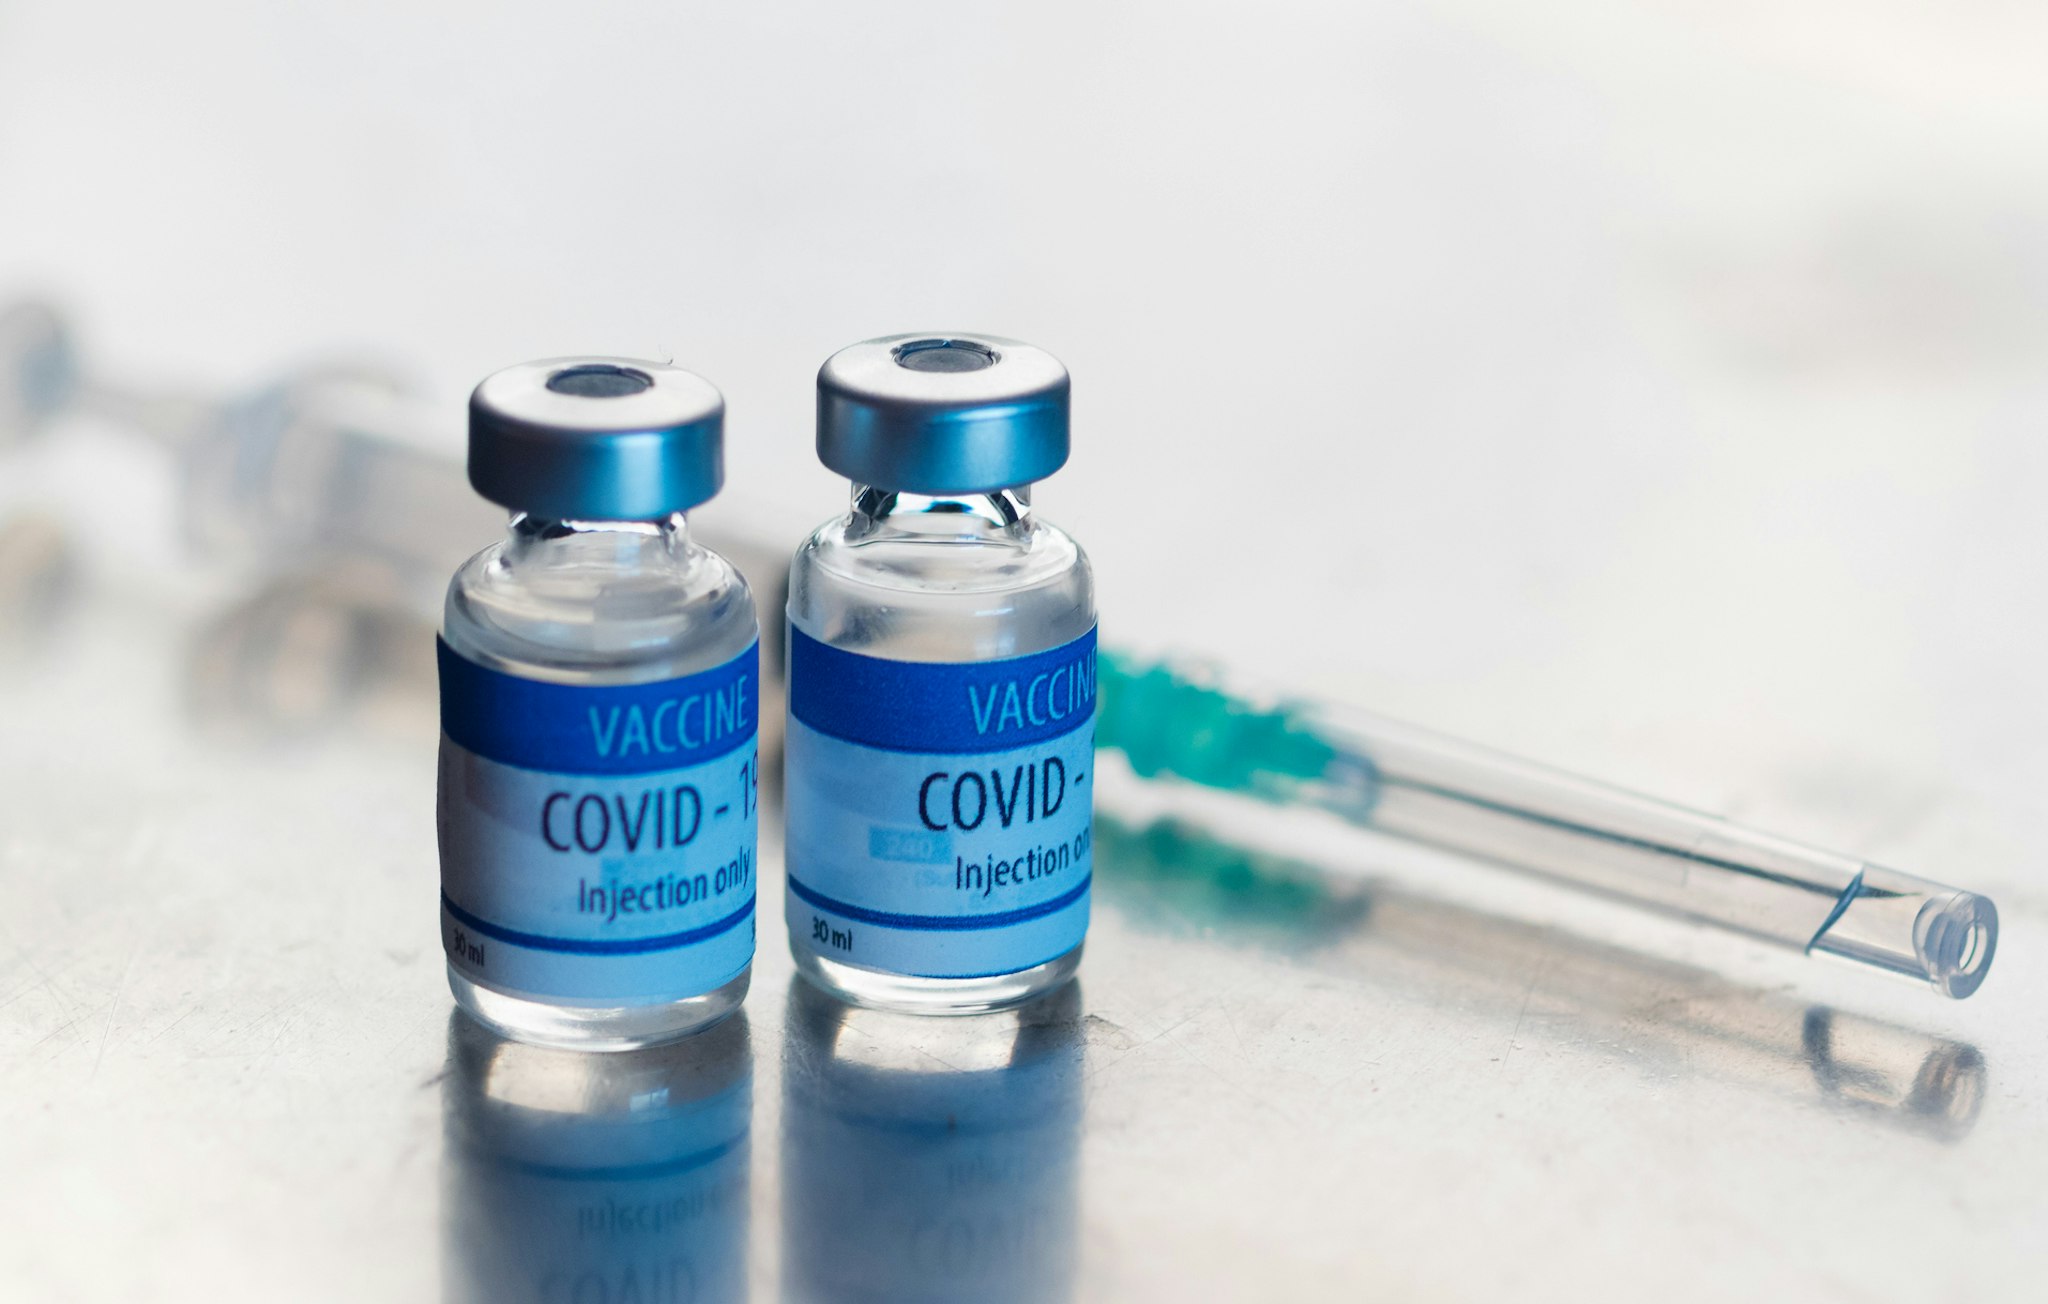 Ready-to-inject vials of Covid-19 vaccine